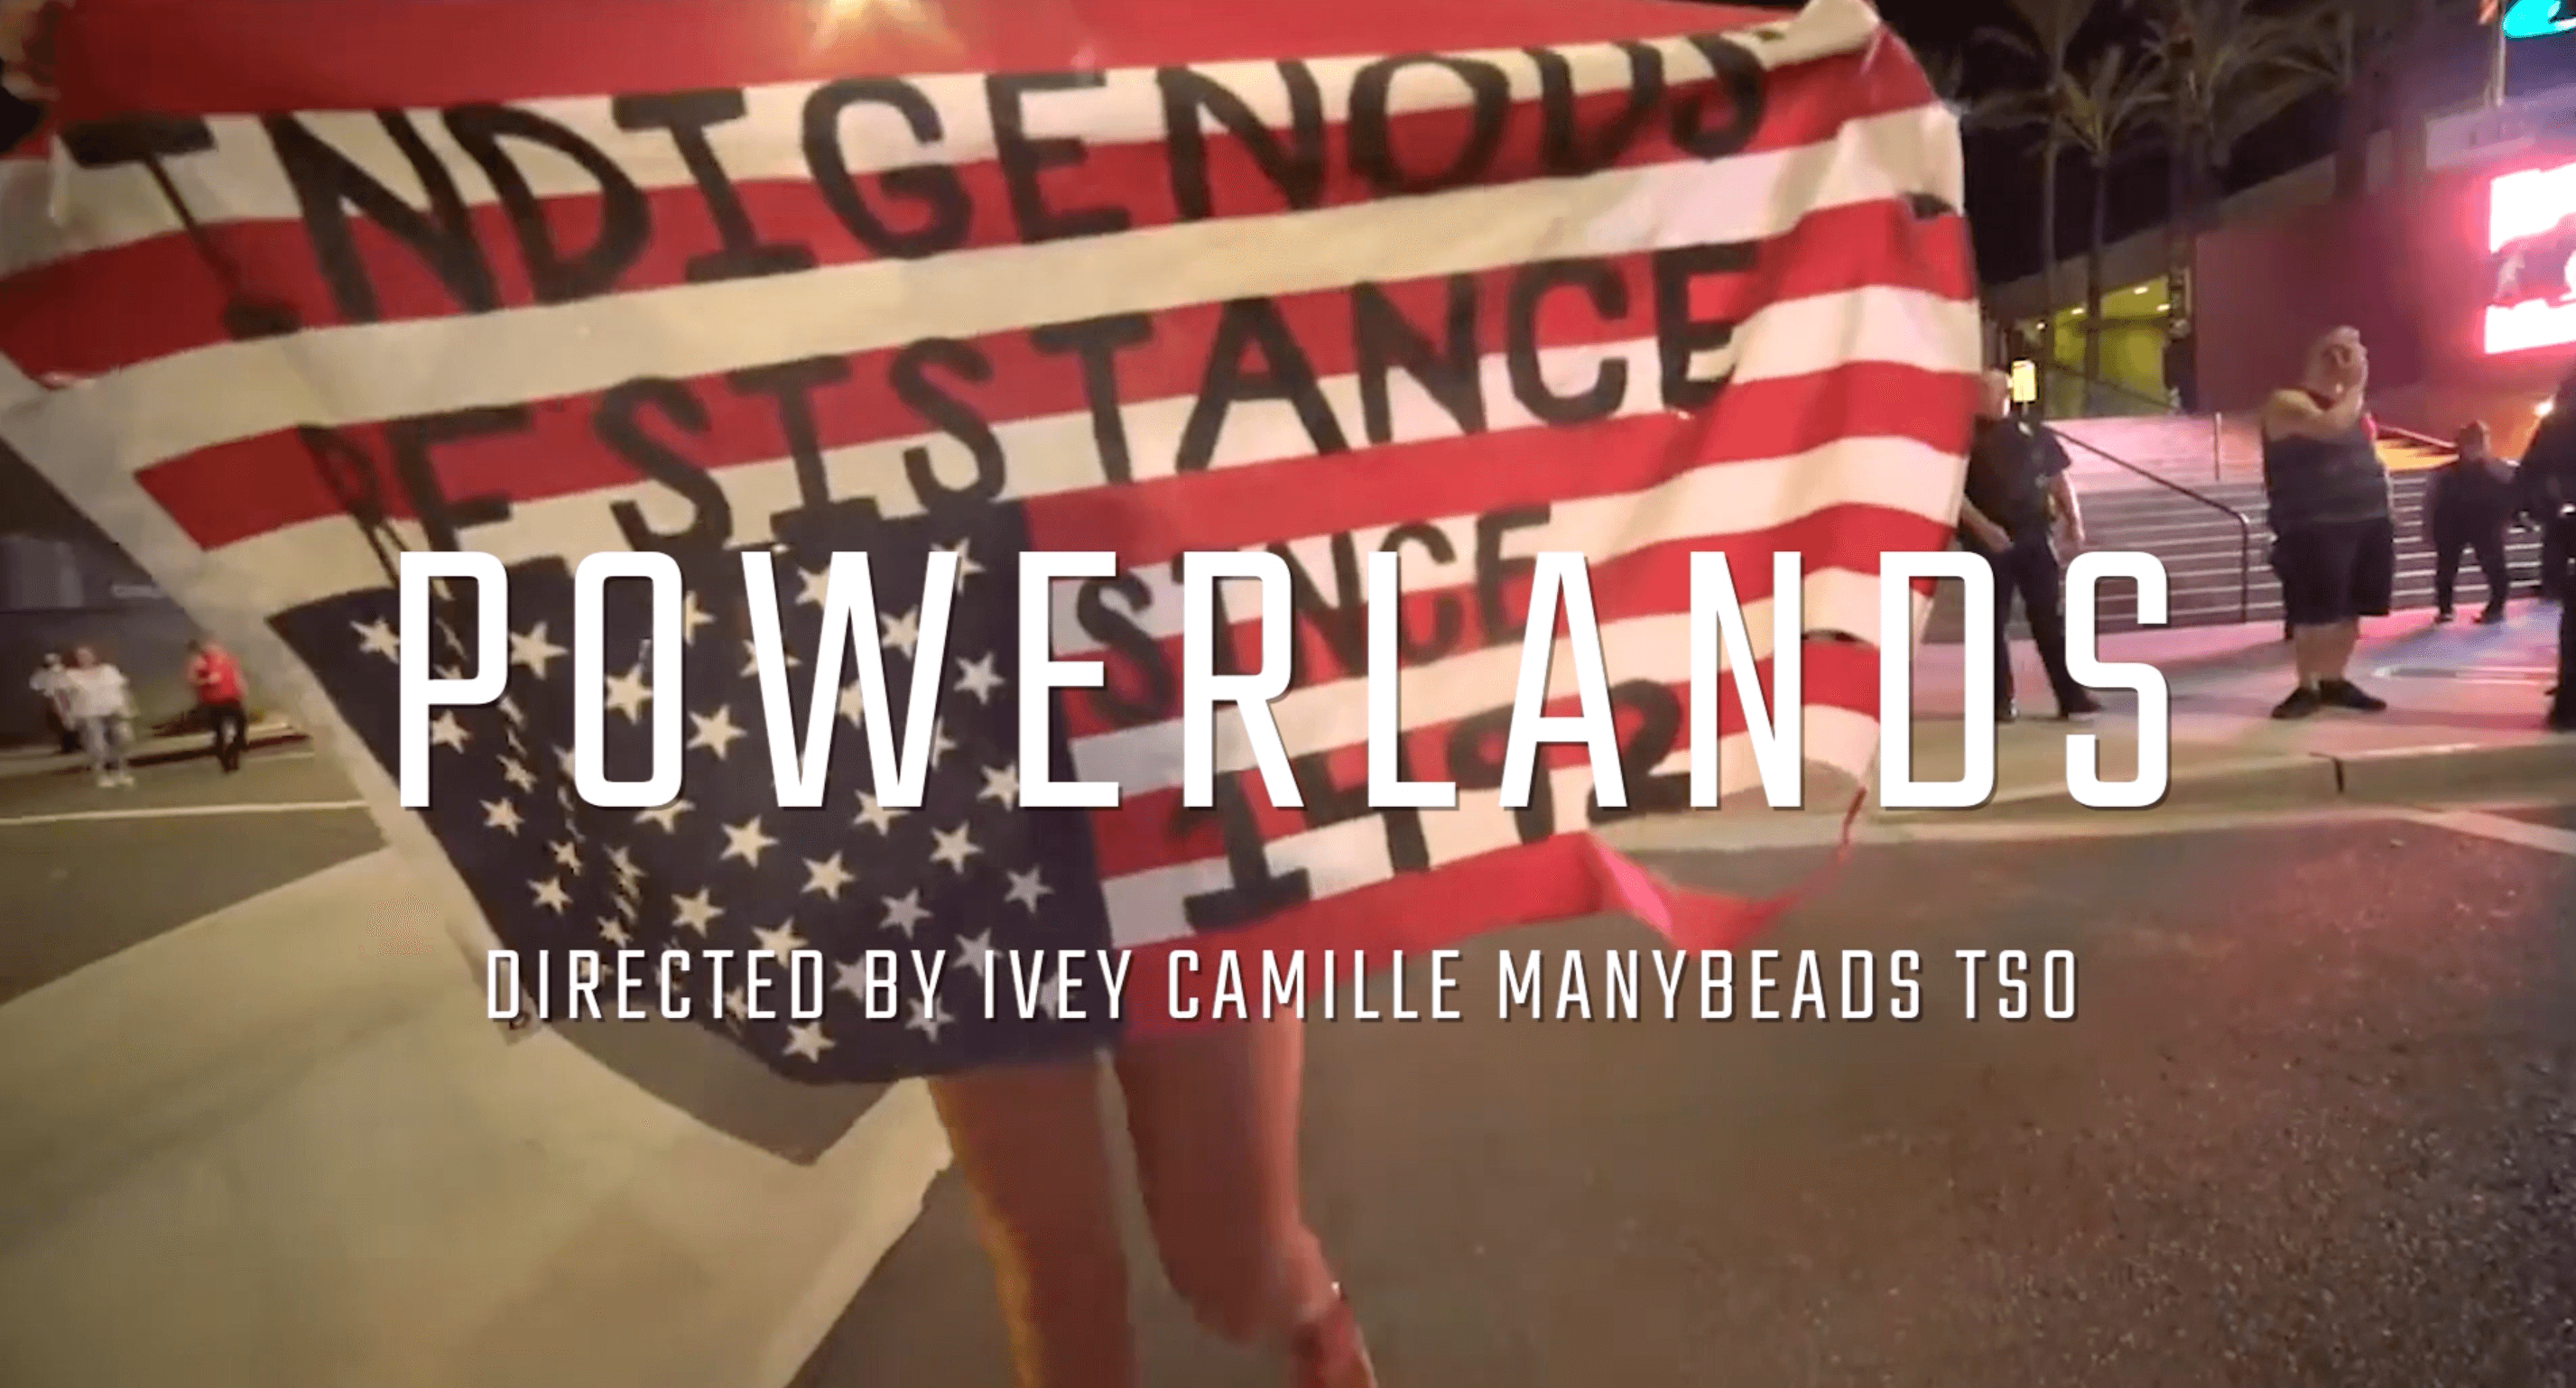 Still from the film Powerlands, a person holds a US flag that is upside down and says Indigenous Resistance since 1492, on top of it there is the title of the film and the name of the director